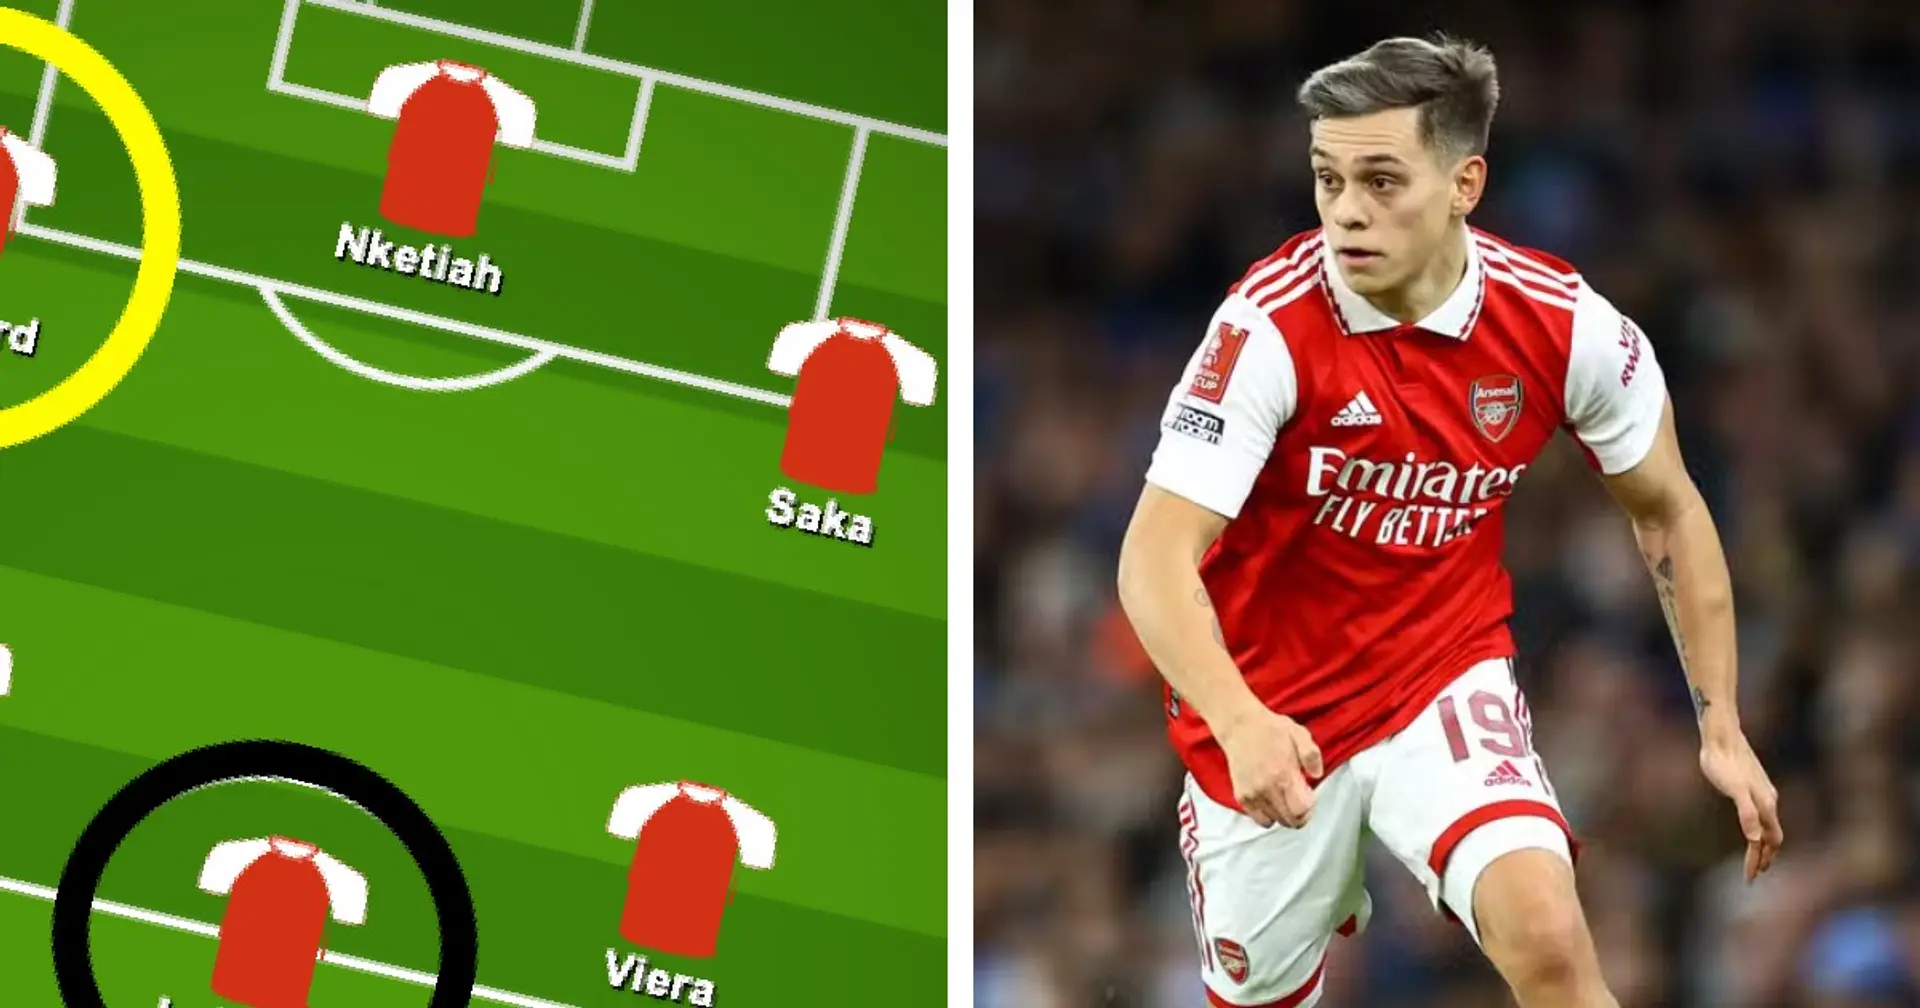 Arsenal's biggest strength and weakness in Man City defeat - shown in lineup